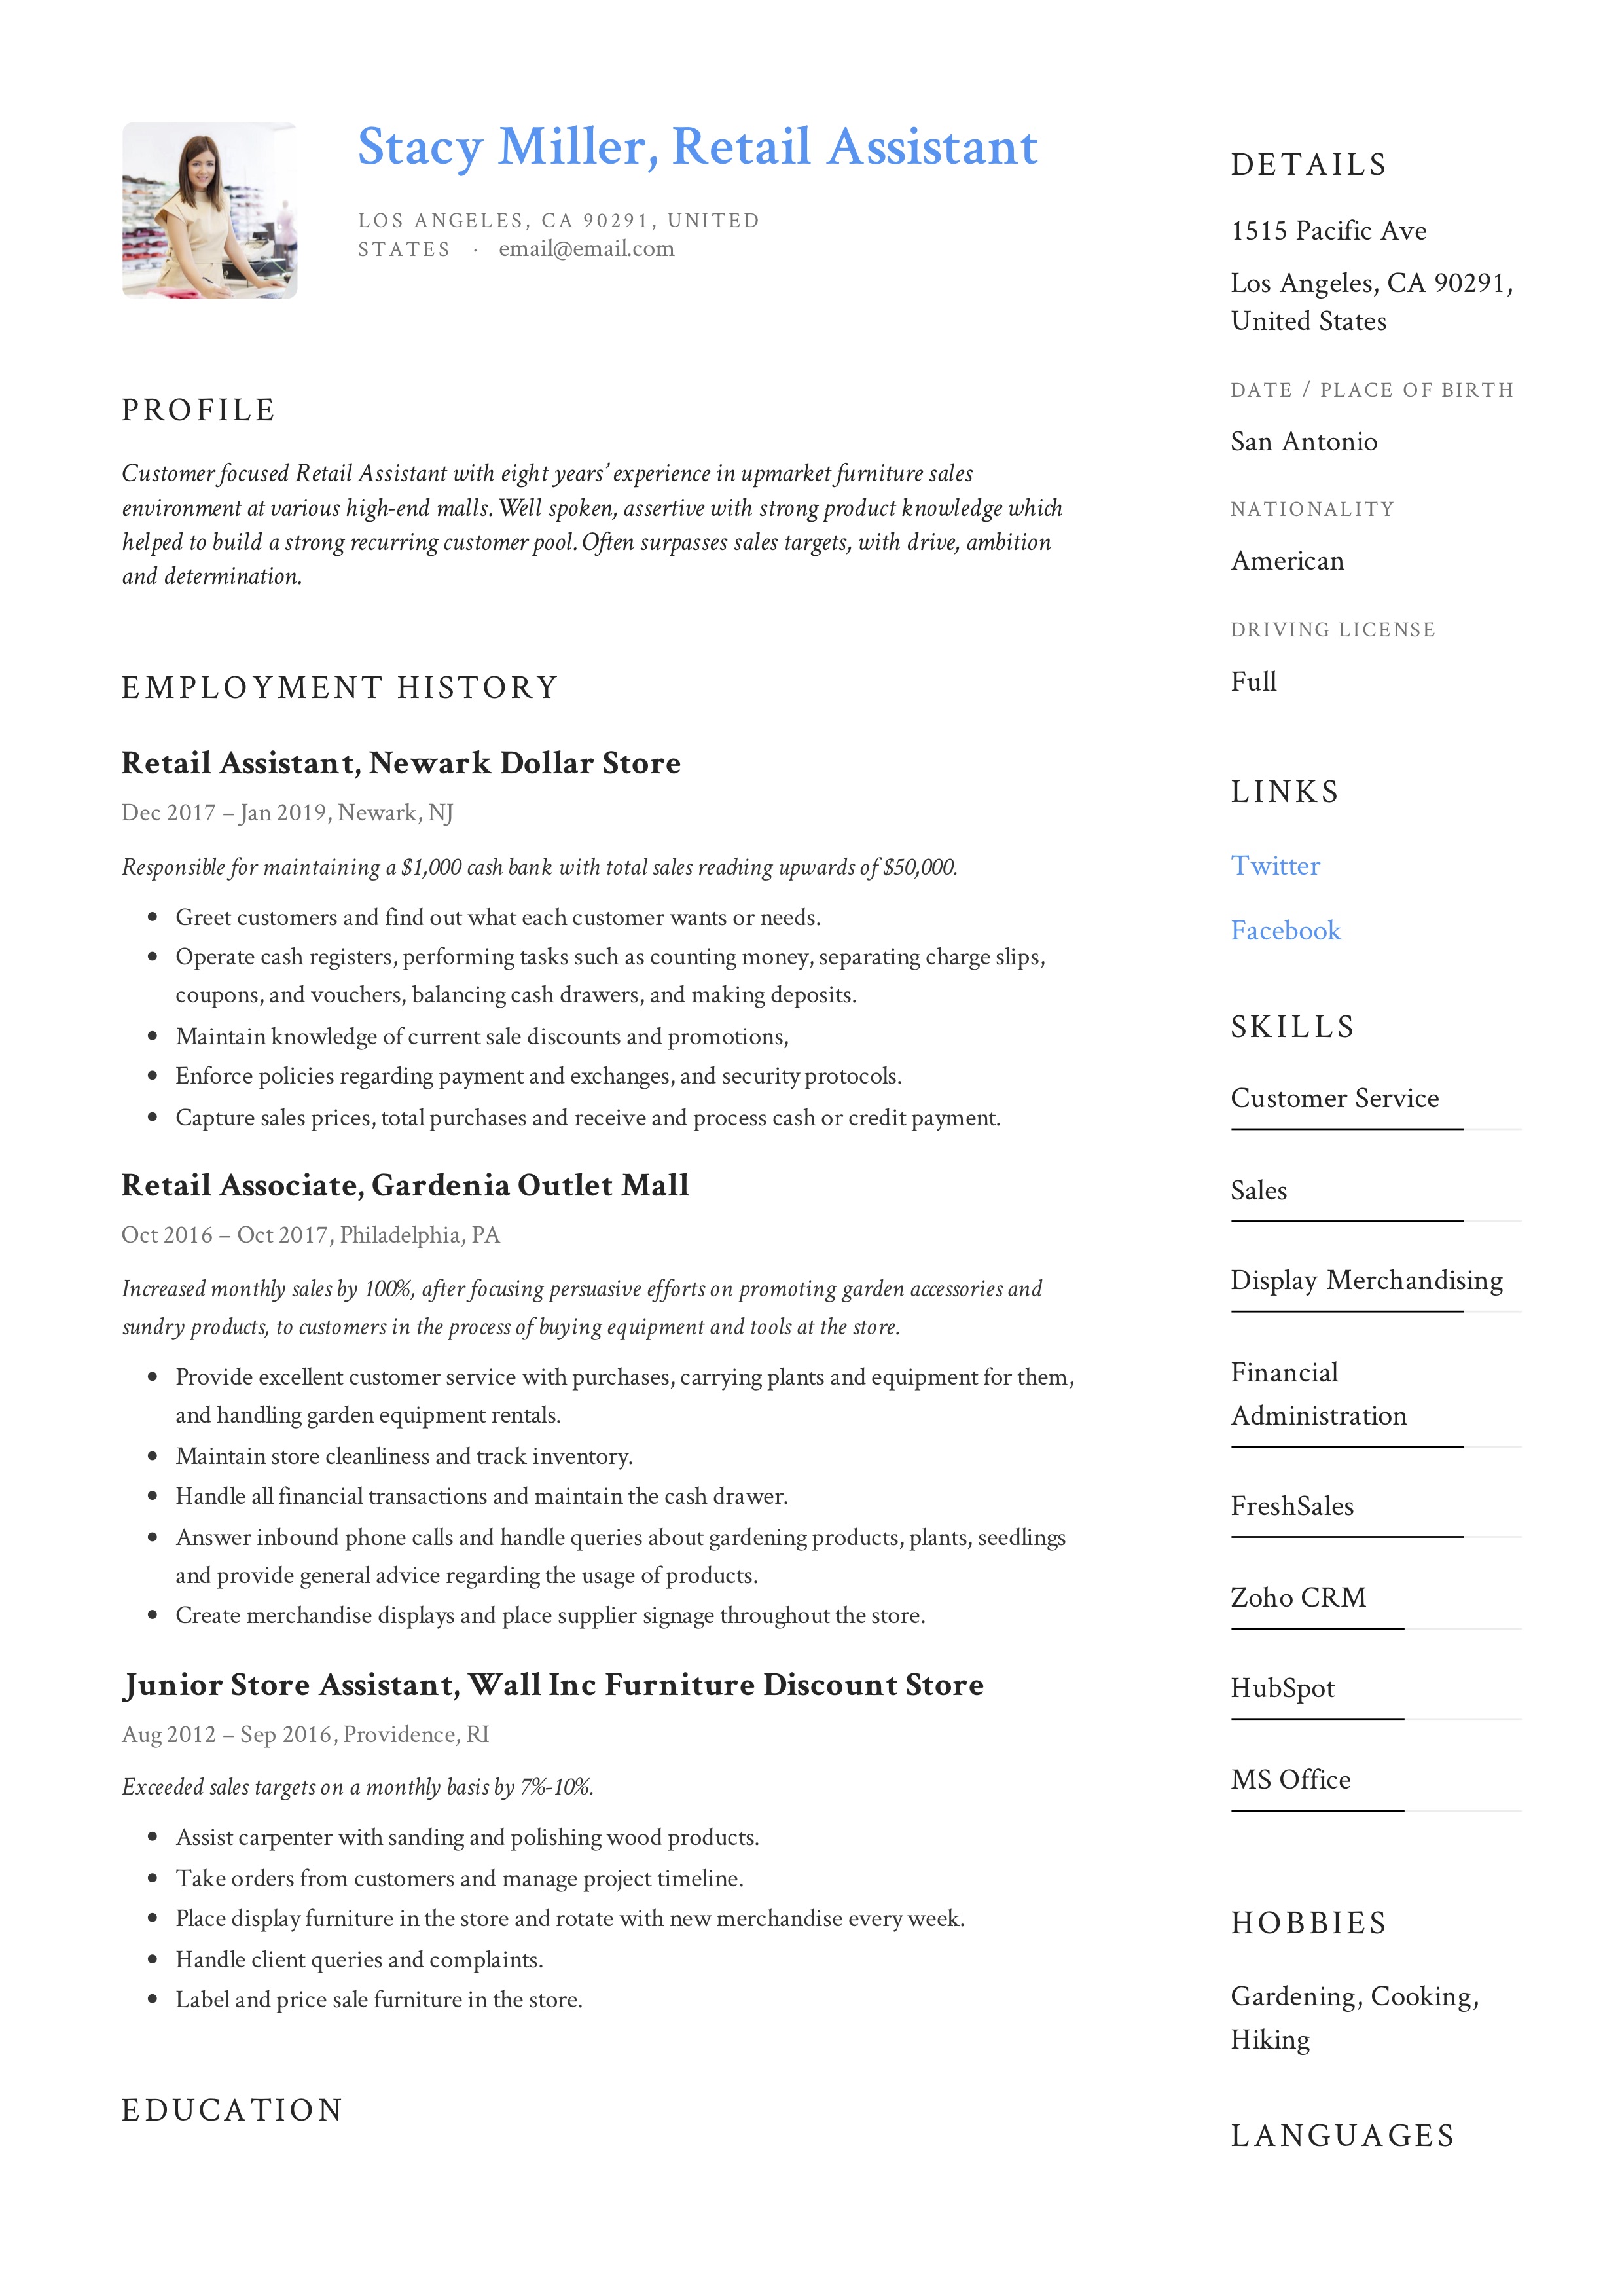 personal profile on cv for retail